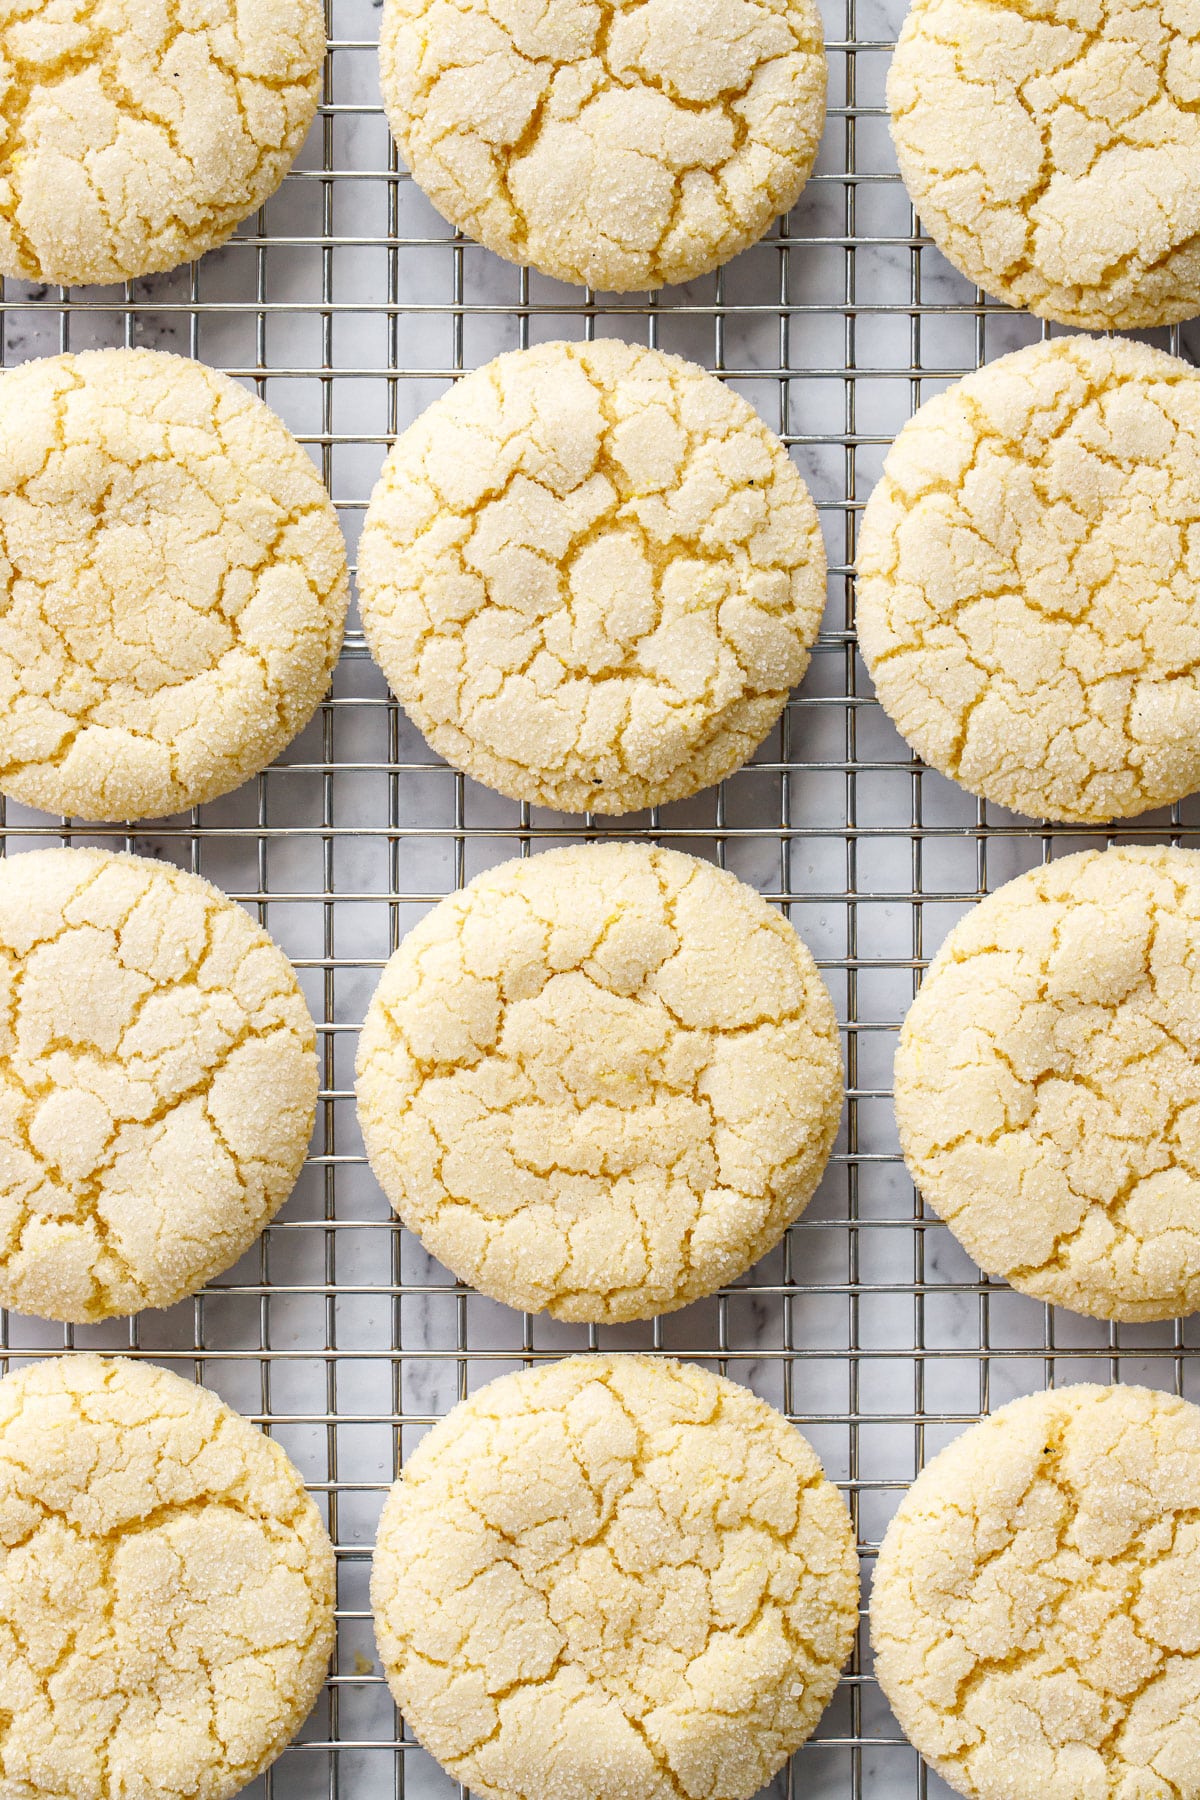 Overhead view of rows of Lemon Olive Oil Sugar Cookies with crinkly tops.